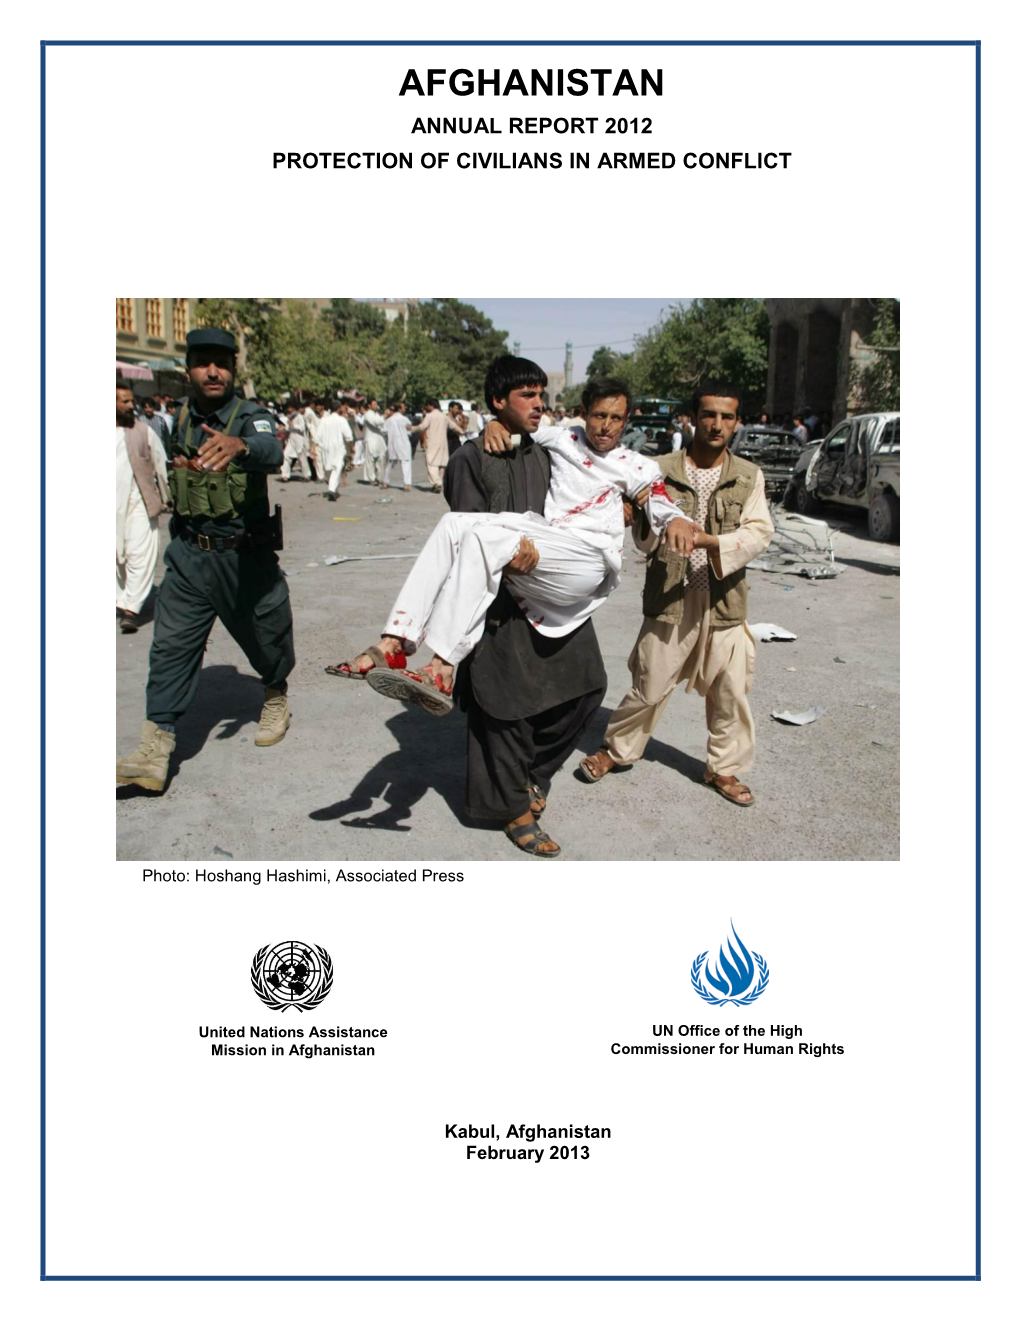 Afghanistan Annual Report 2012 Protection of Civilians in Armed Conflict